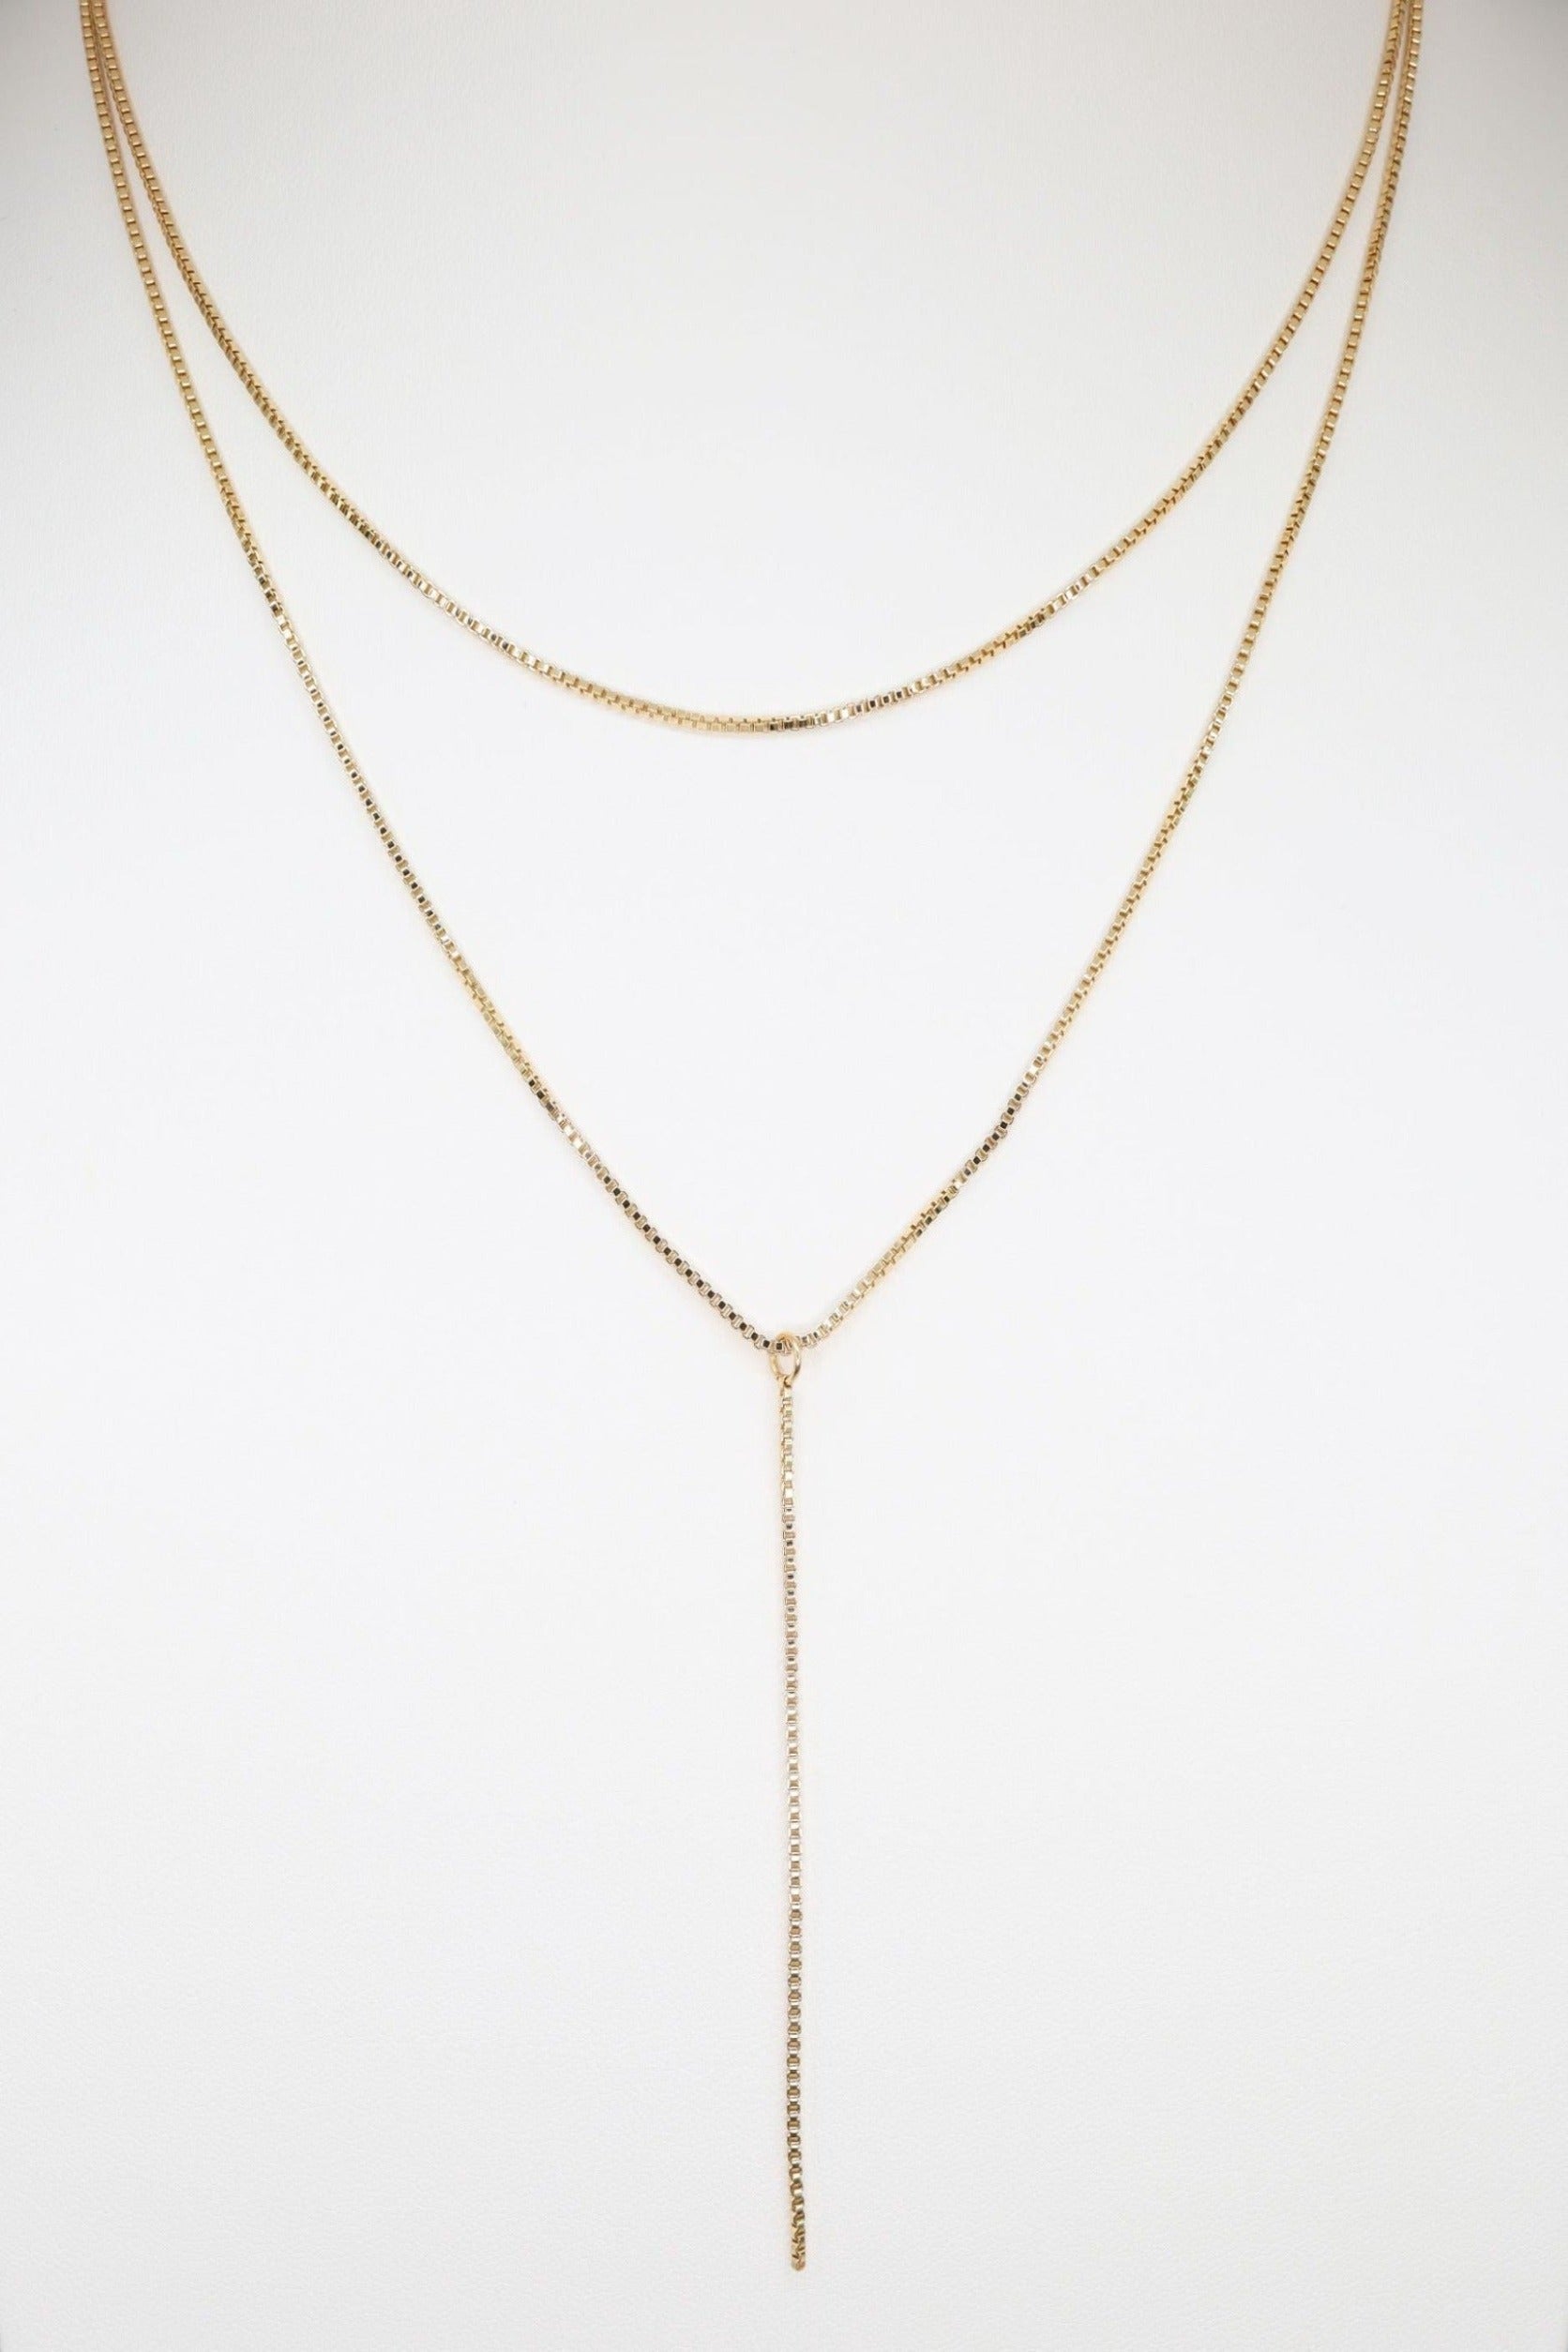 Akira Necklace - Simply Clutched